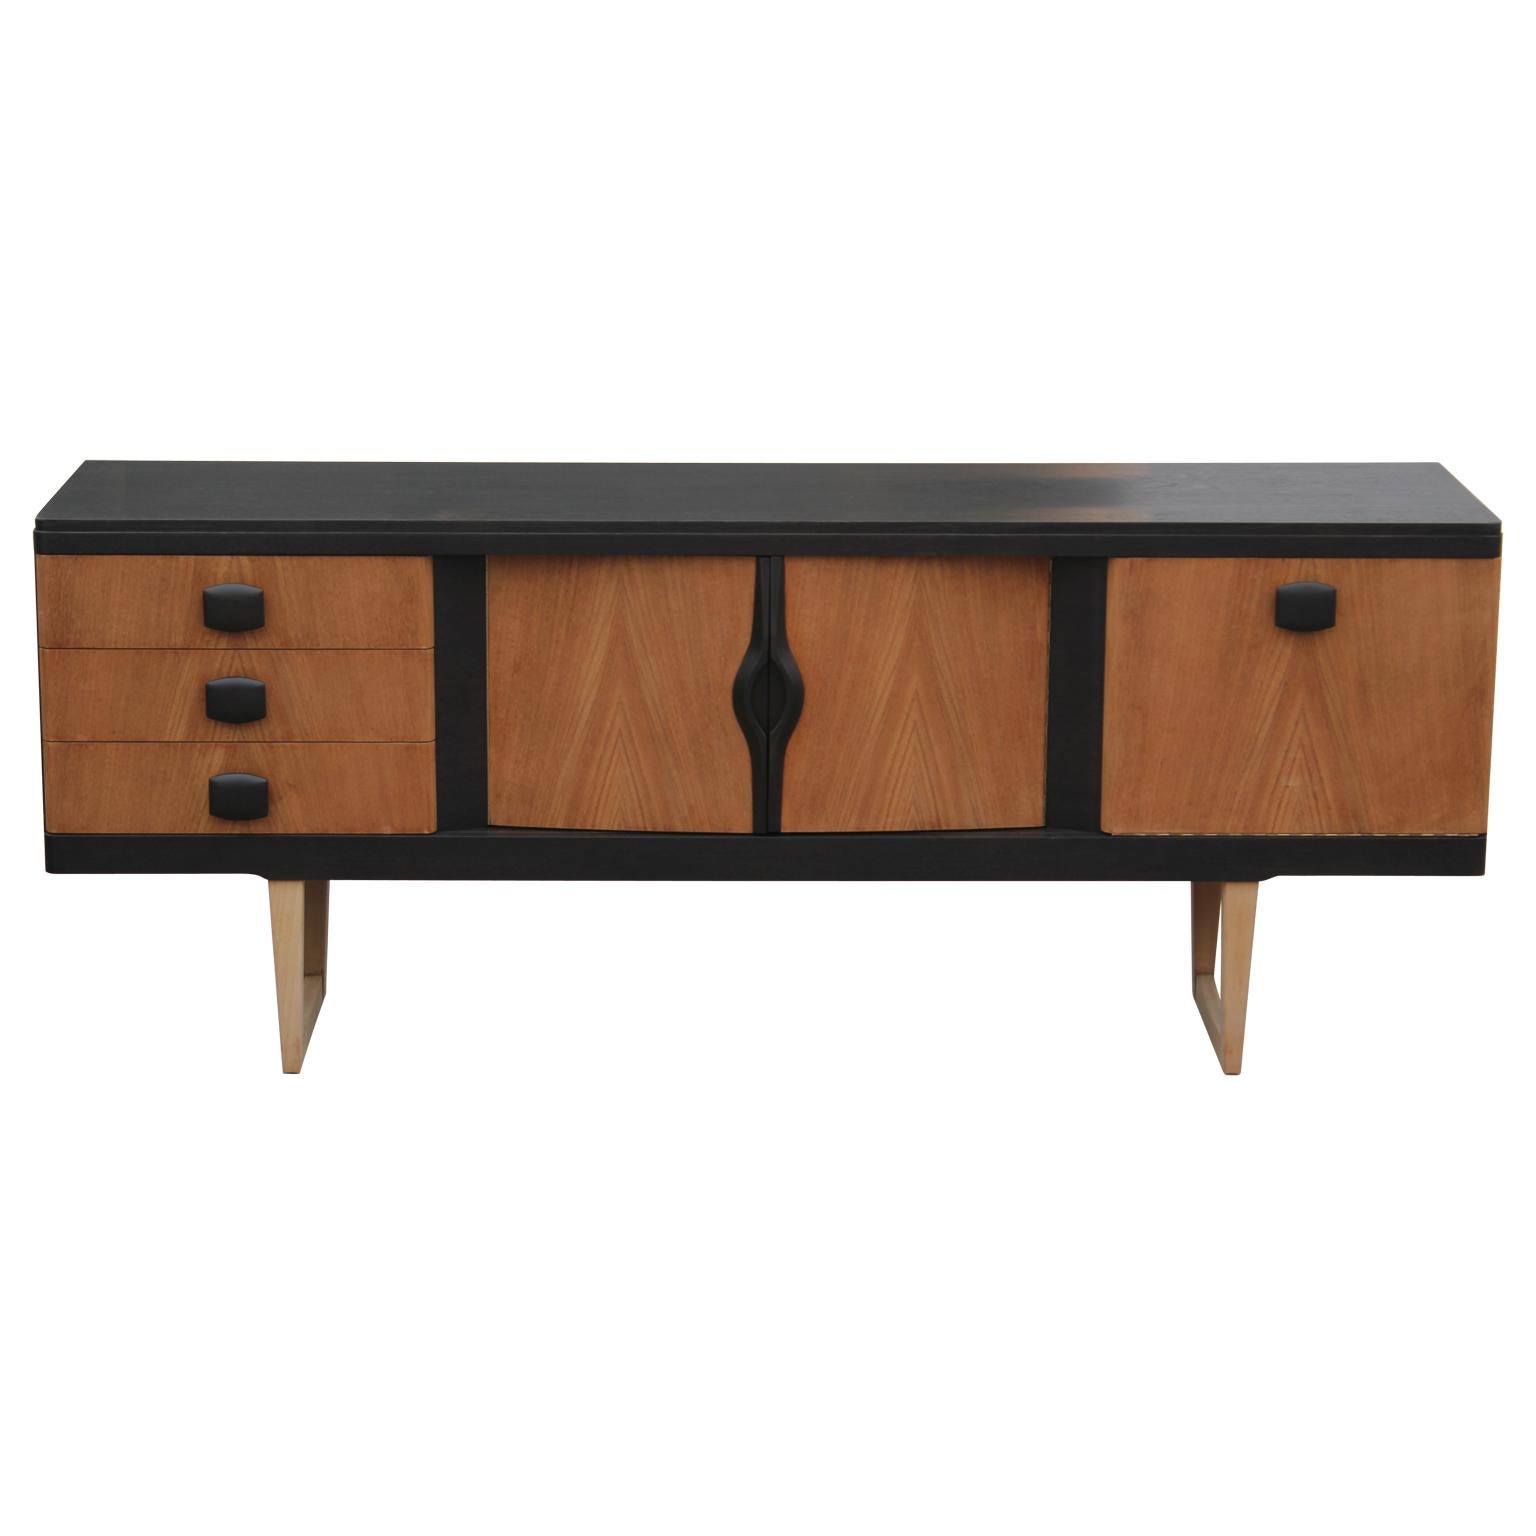 Lovely restored modern credenza with a lovely two-tone finish. This piece features three drawers on the left and two cabinet spaces that open to reveal a single shelf.